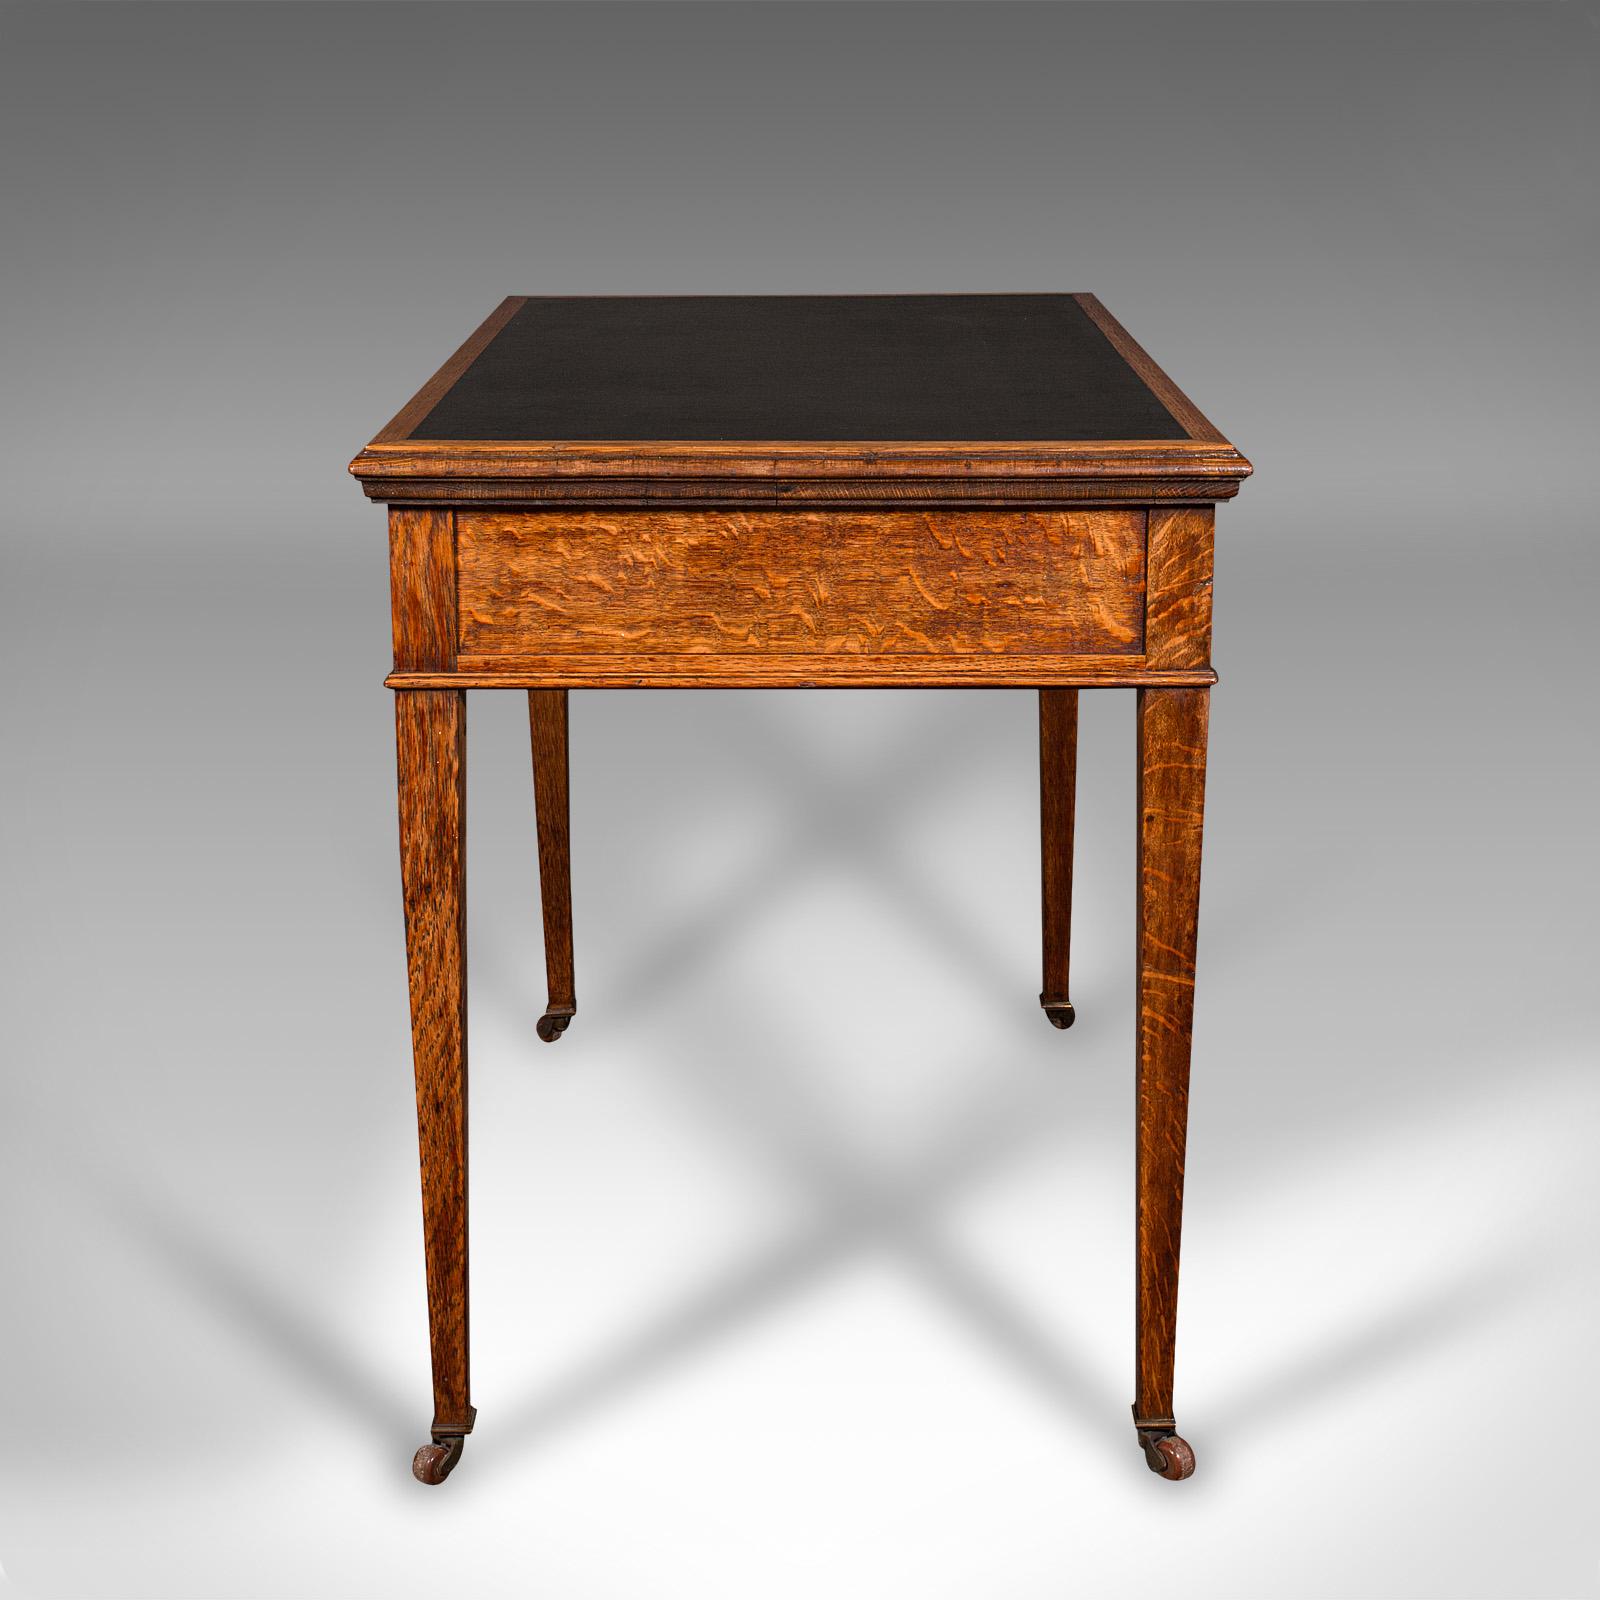 Antique Writing Desk, English, Oak, Leather, Correspondence Table, Edwardian In Good Condition For Sale In Hele, Devon, GB